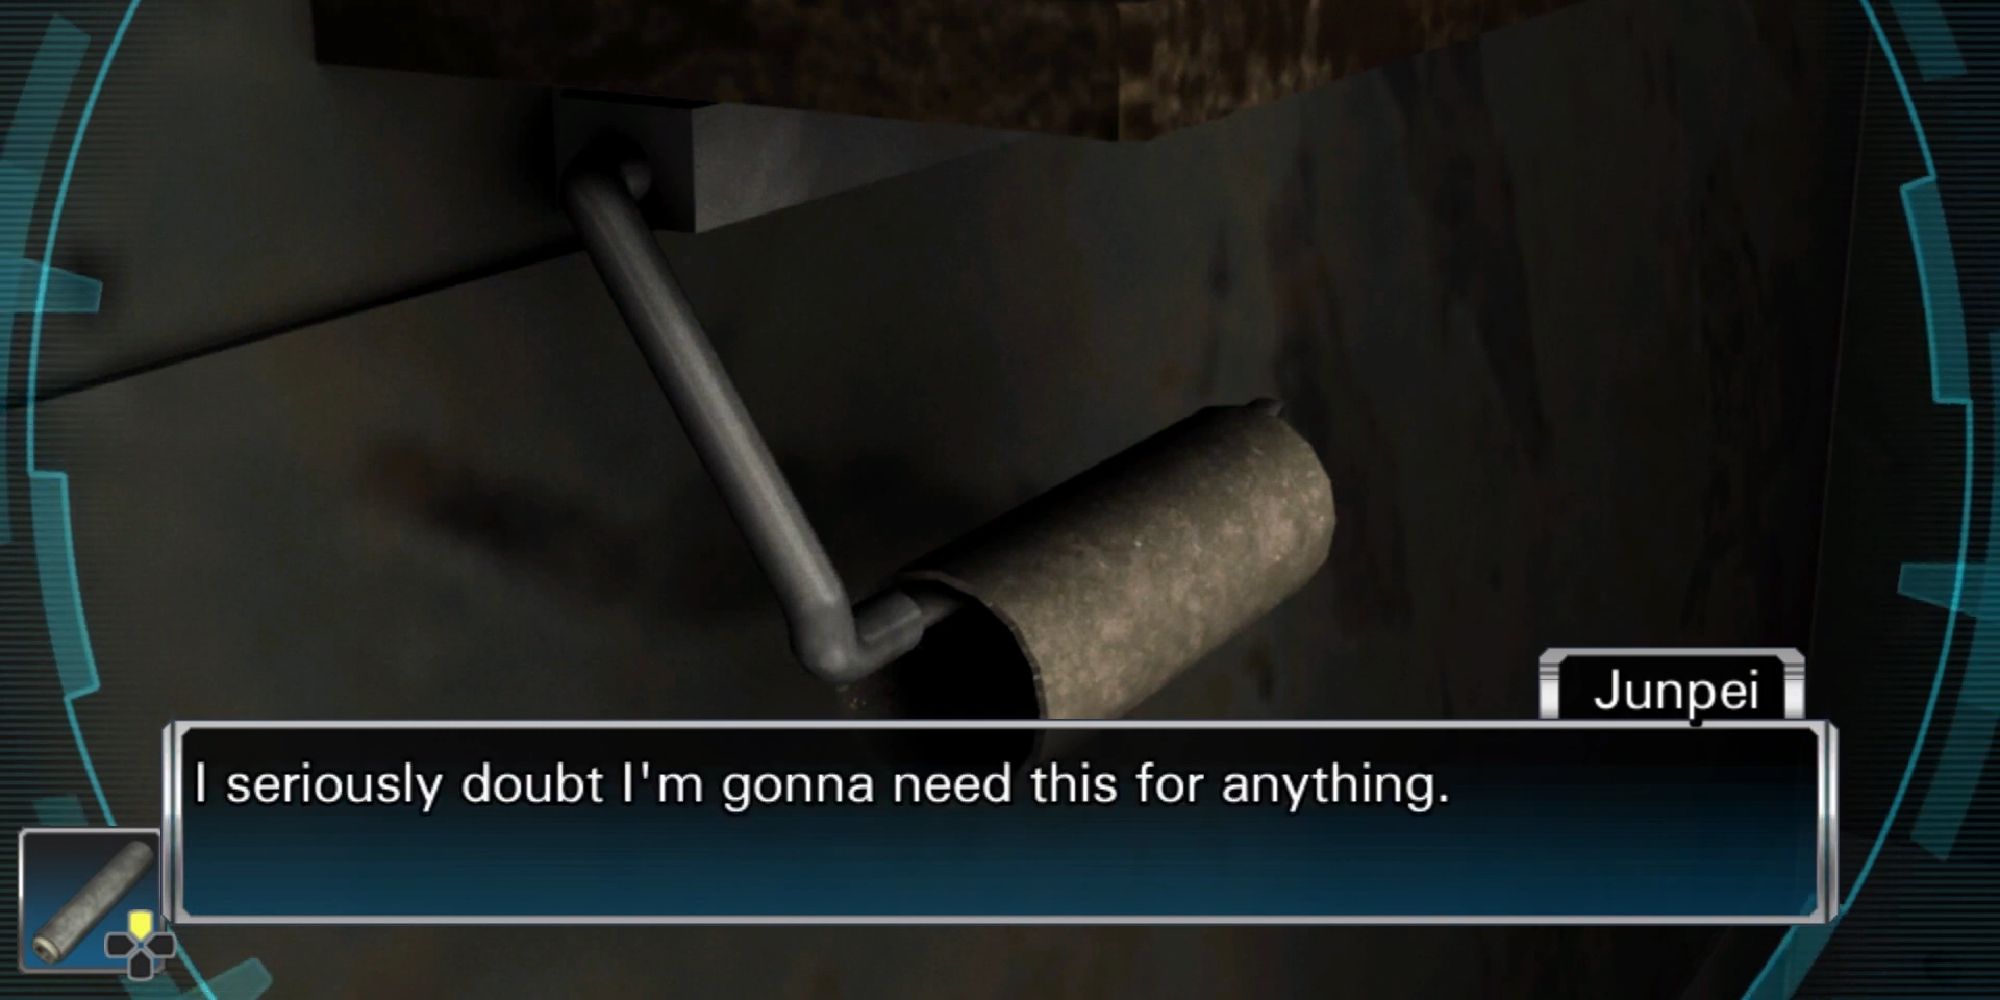 toilet paper roll with junpei saying that it is unimportant (it is important though)